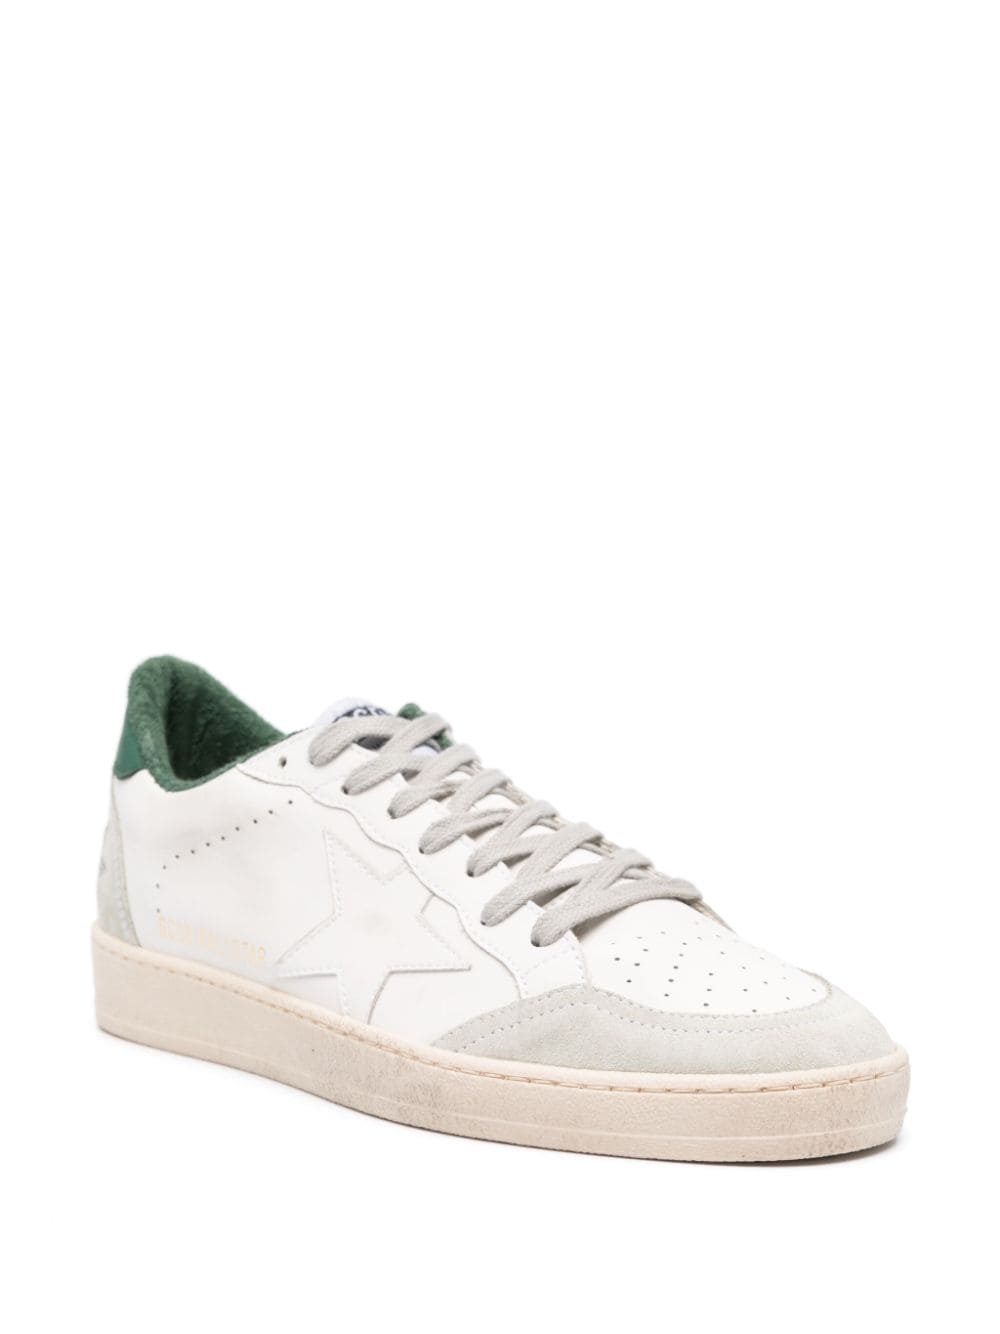 Shop Golden Goose Men's White Suede Low-top Sneakers With Star Patch And Worn-out Effect